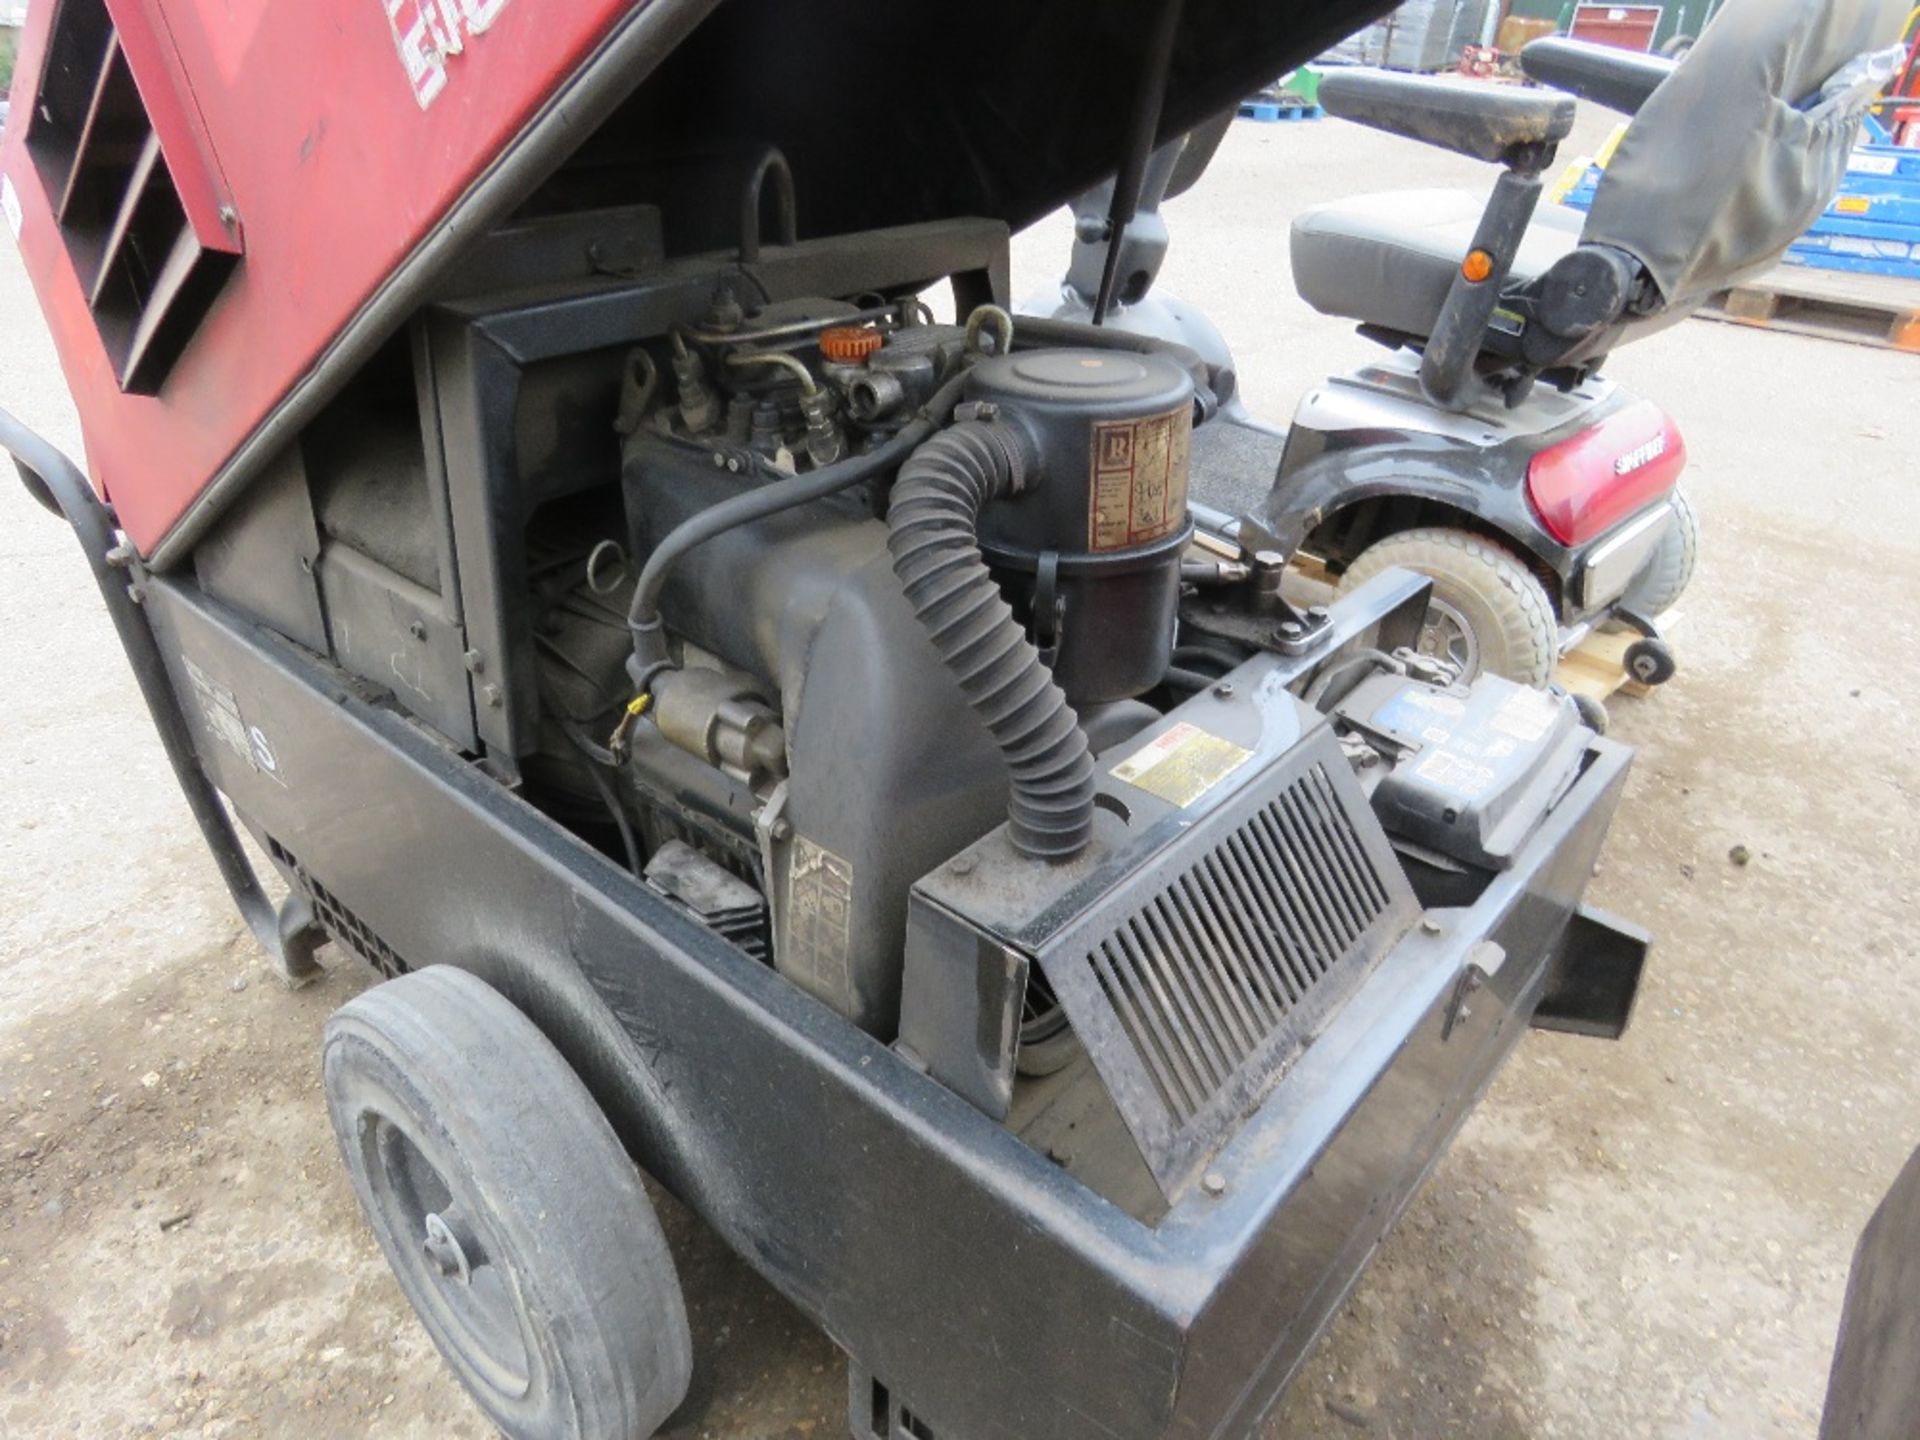 MOSA TS250SXC WELDER GENERATOR. WHEN TESTED WAS SEEN TO RUN AND SHOWED POWER ON THE GUAGE. - Image 3 of 4